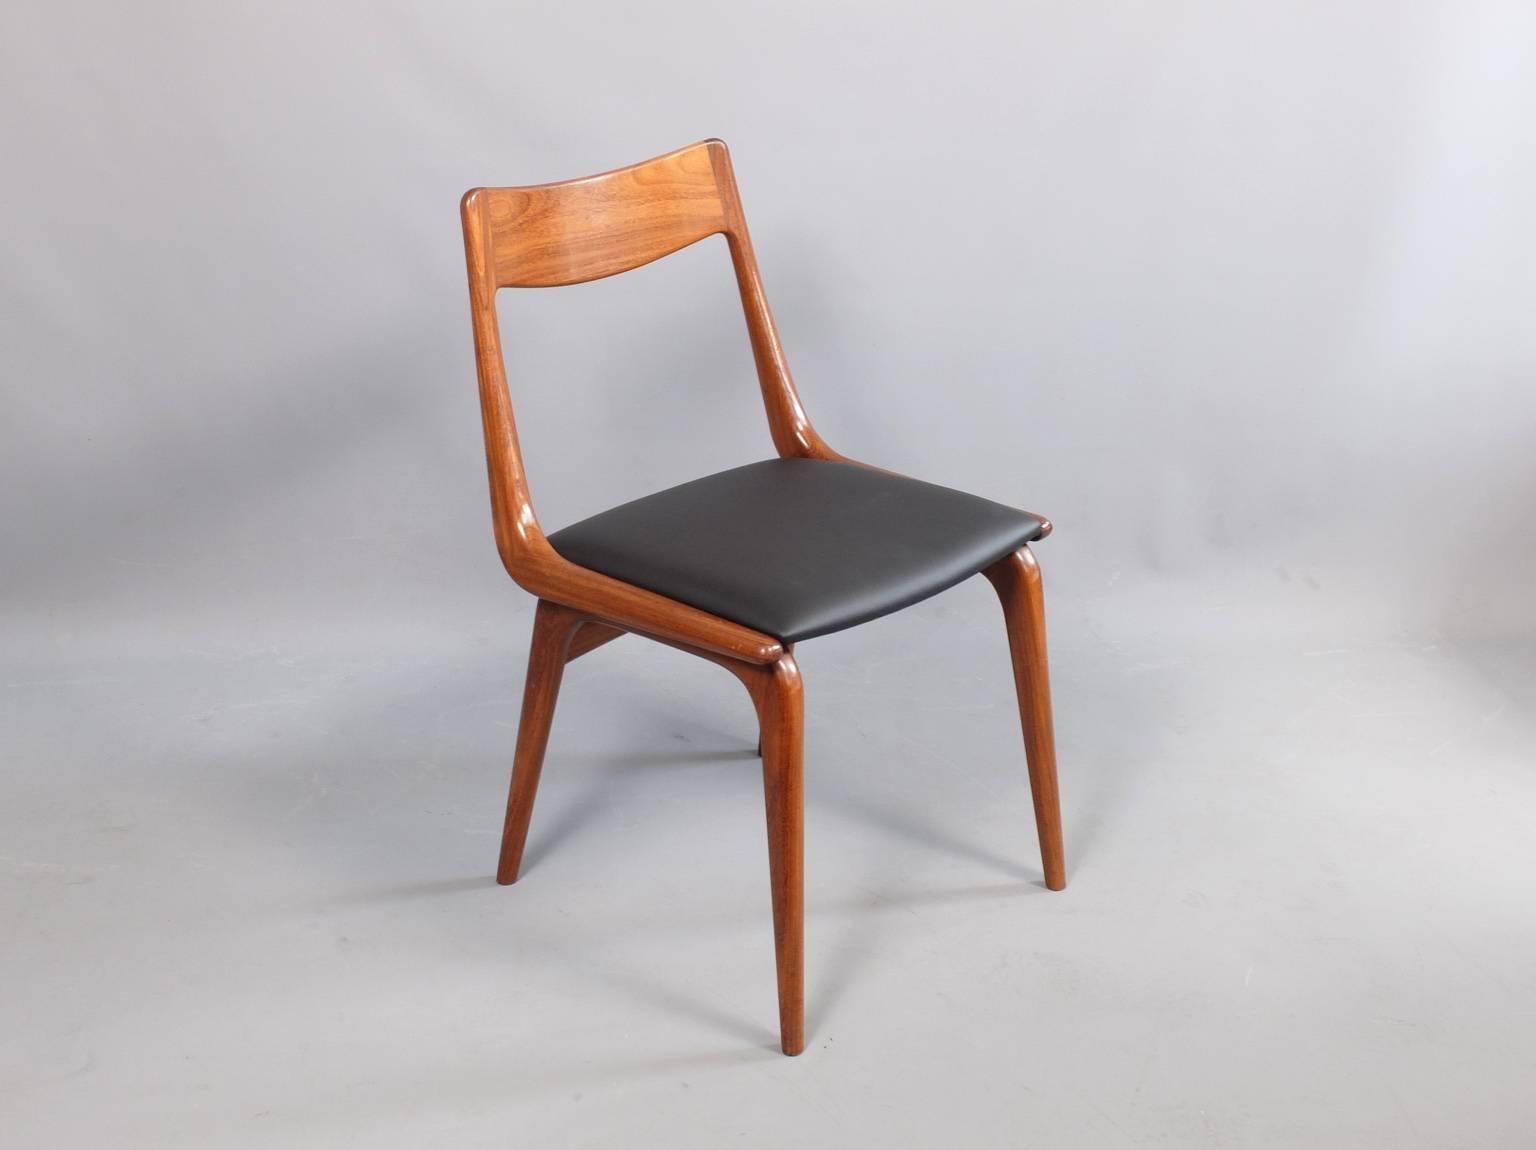 A set of six teak dining chairs designed by Erik Christensen and manufactured by Slagelse, Denmark, circa 1960. We have re-upholstered the seats with black leather.